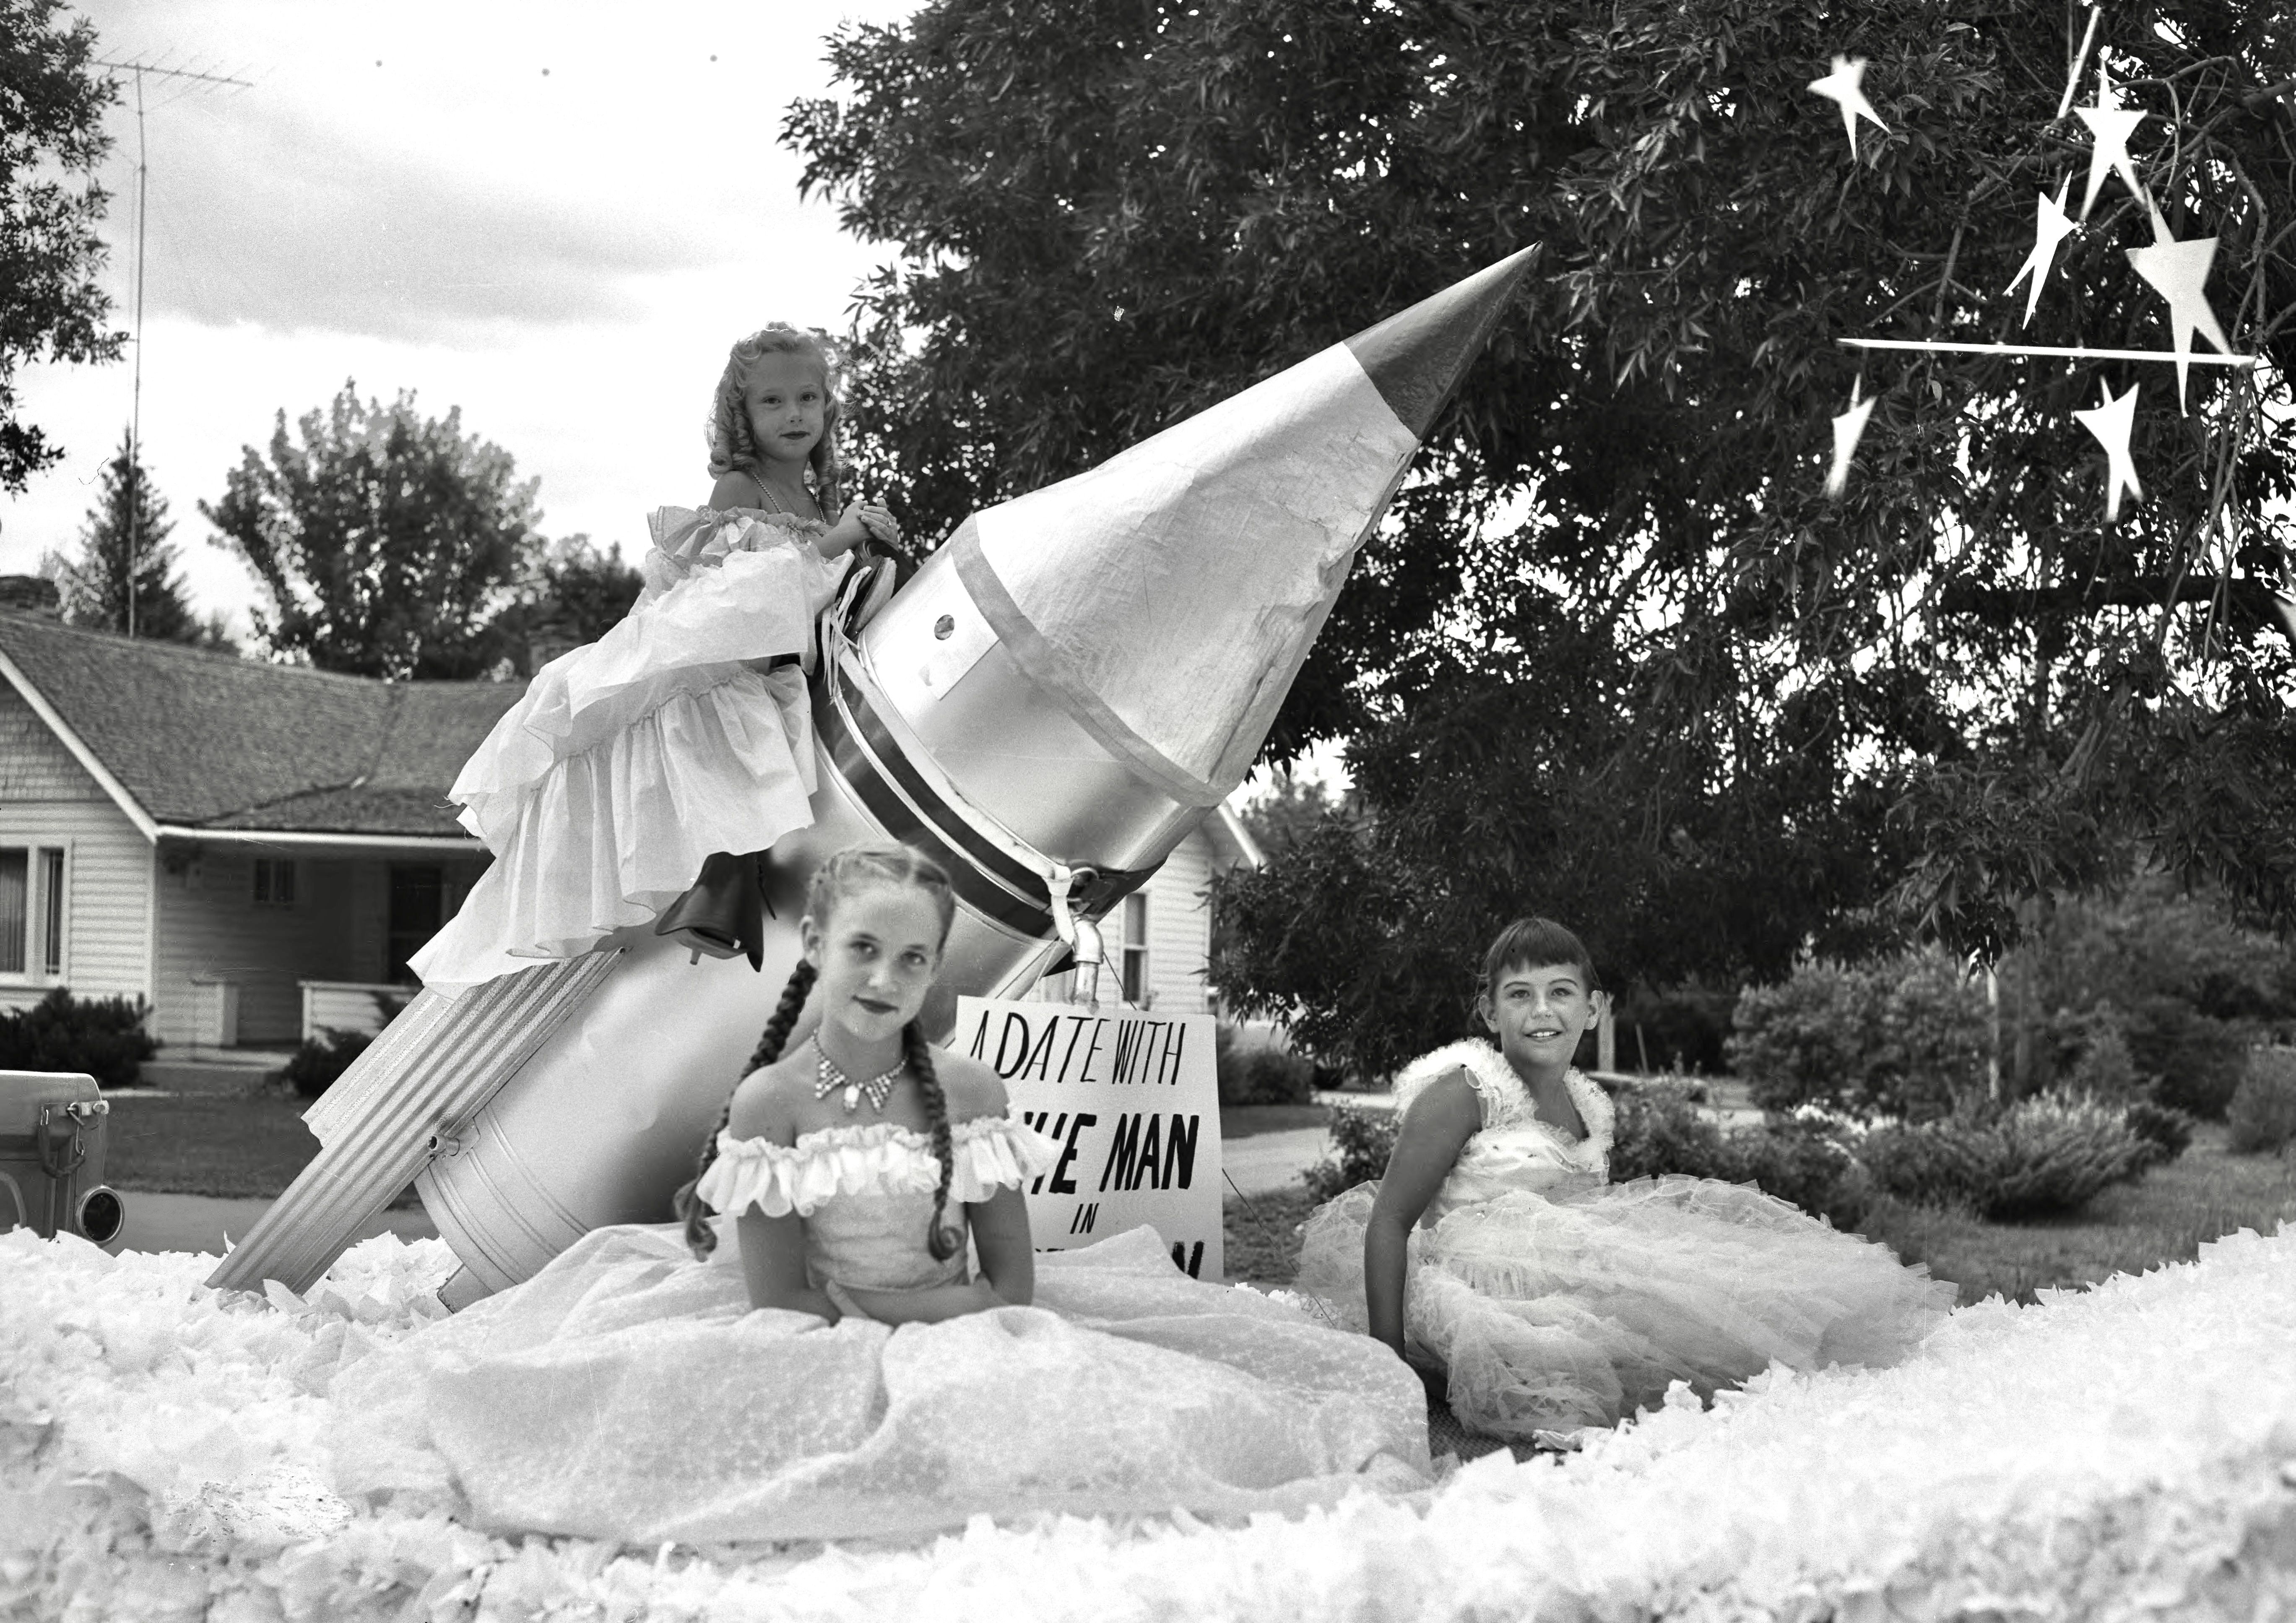 Three girls pose on a parade float featuring a rocket and a sign that reads "A date with the man on the moon."